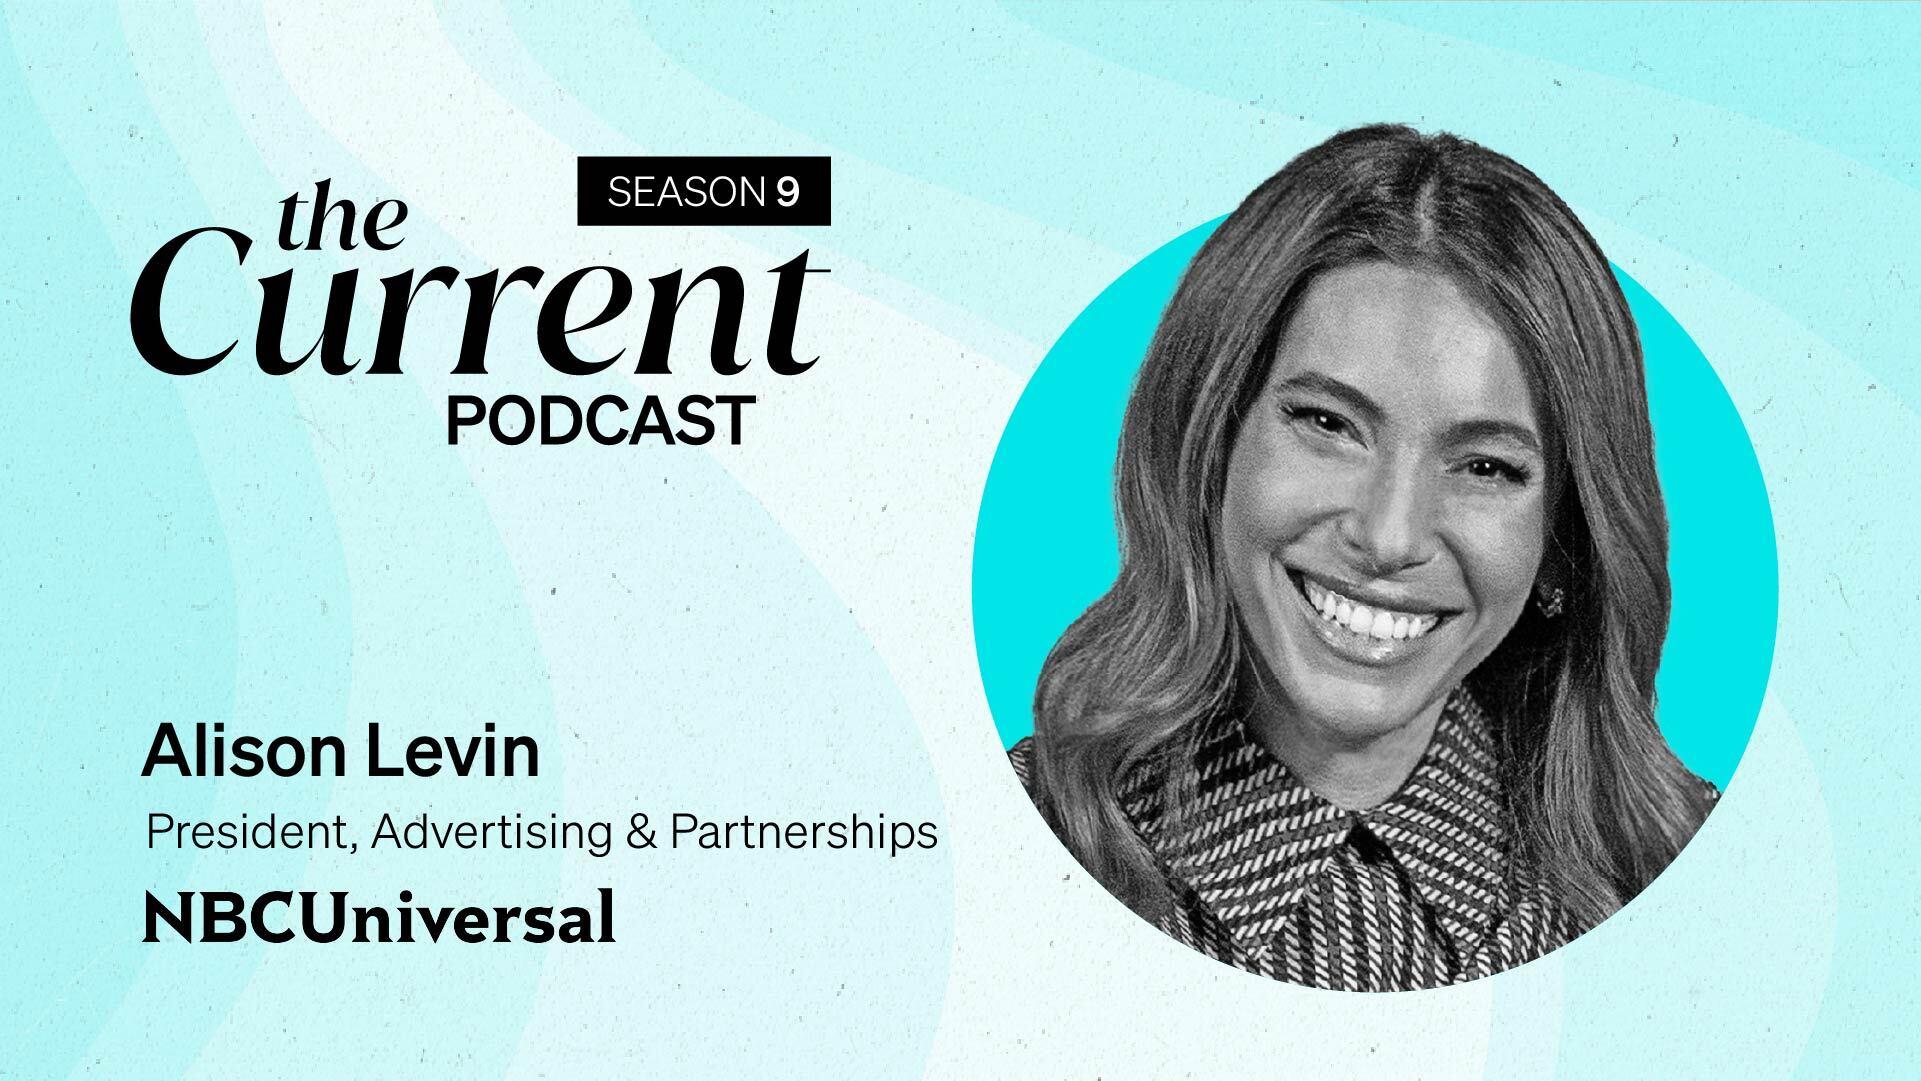 The Current Podcast, Season 9: Alison Levin, President, Advertising & Partnerships, NBCUniversal